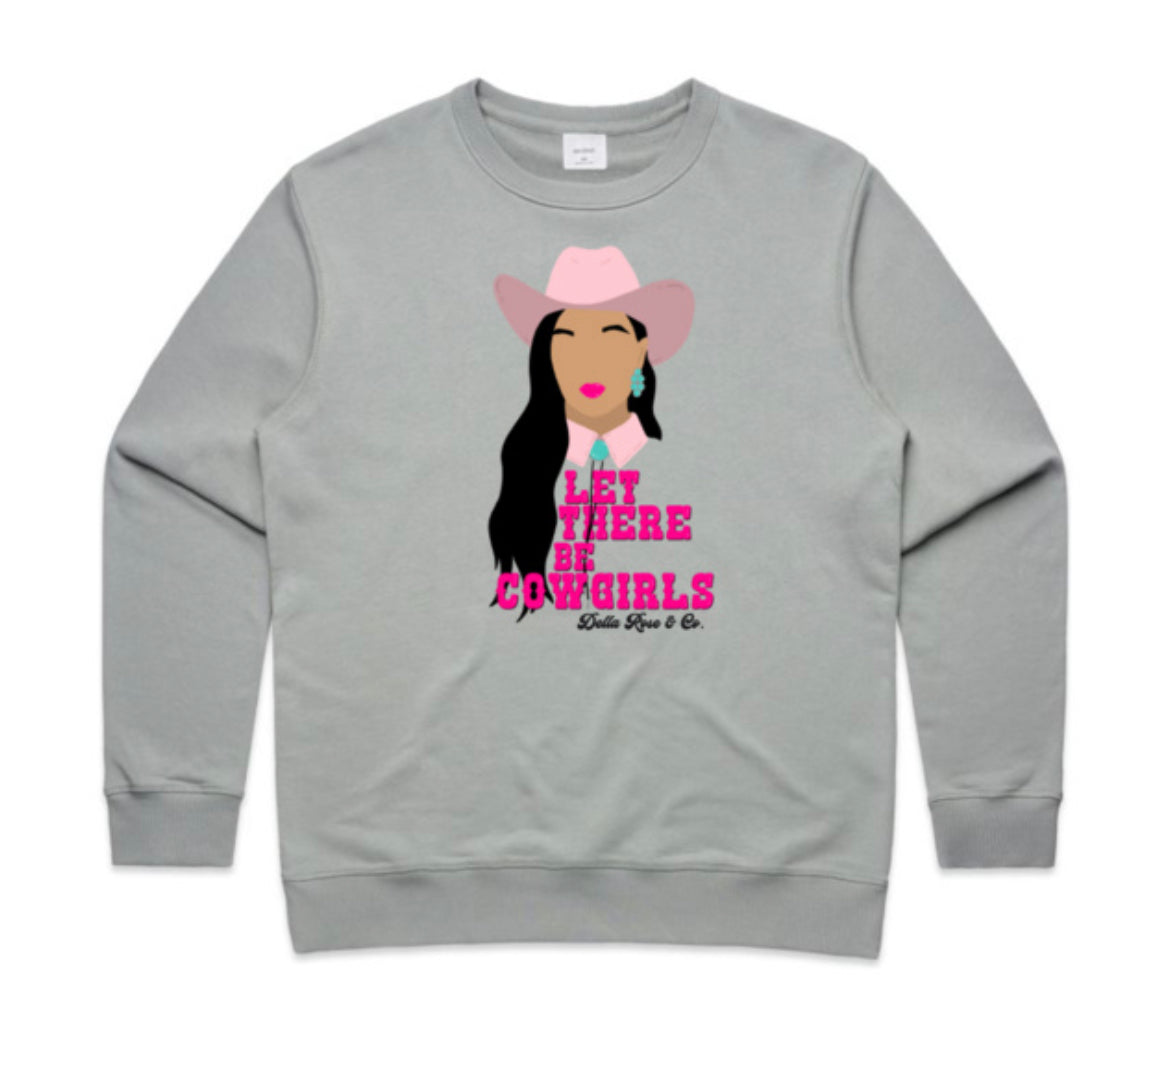 Let There Be Cowgirls Crew (Black Hair, ladies sizes)